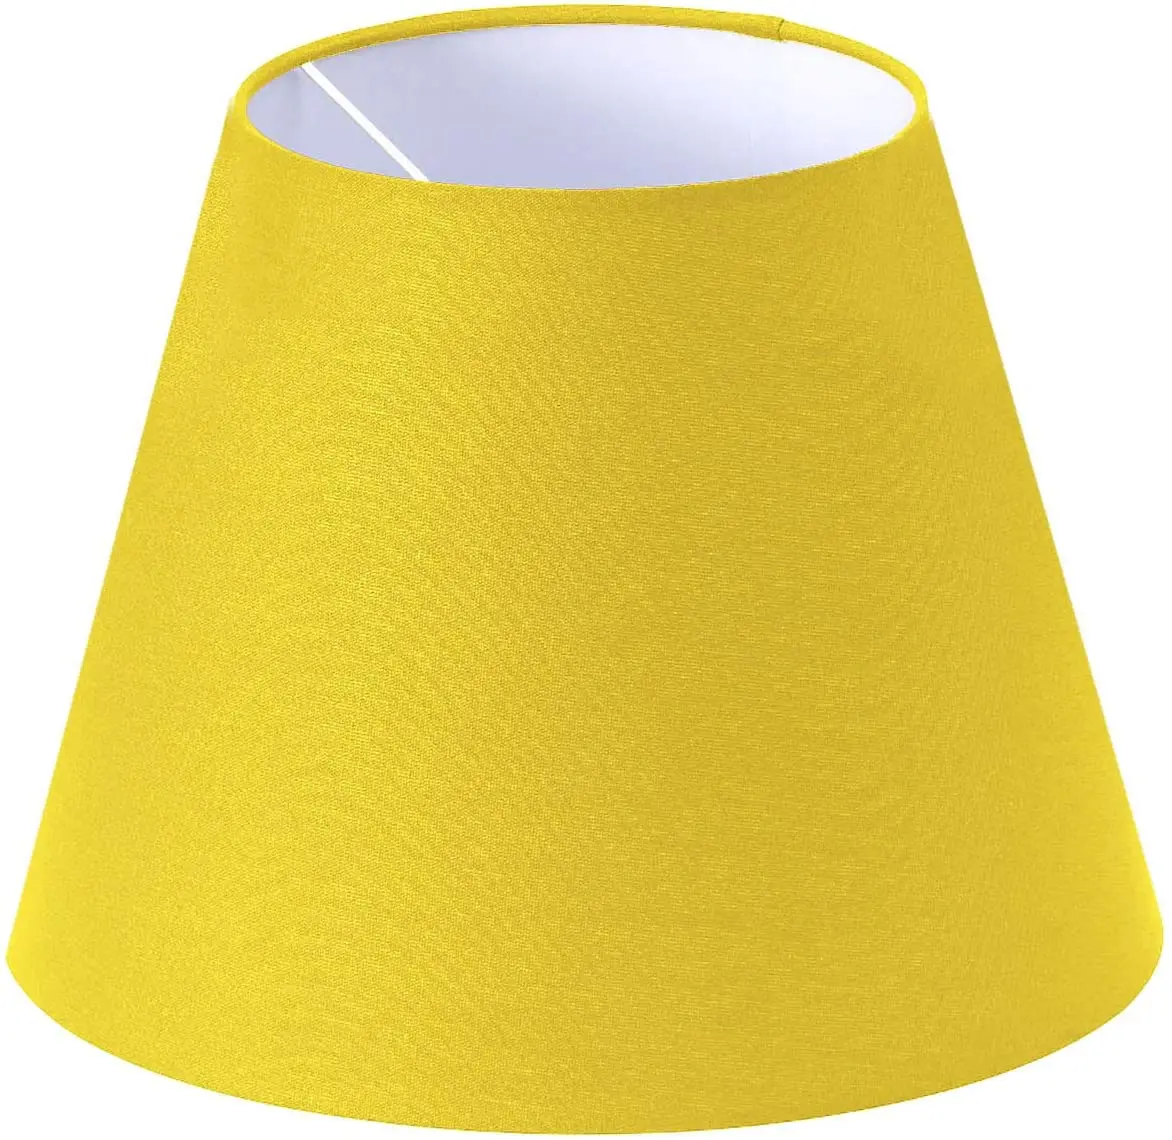 Floor Lamp Lampshade Yellow Cone Lampshade 38x30x22 Cm Decorative High Quality Special Lampshade Fabric and metal Inner Nes